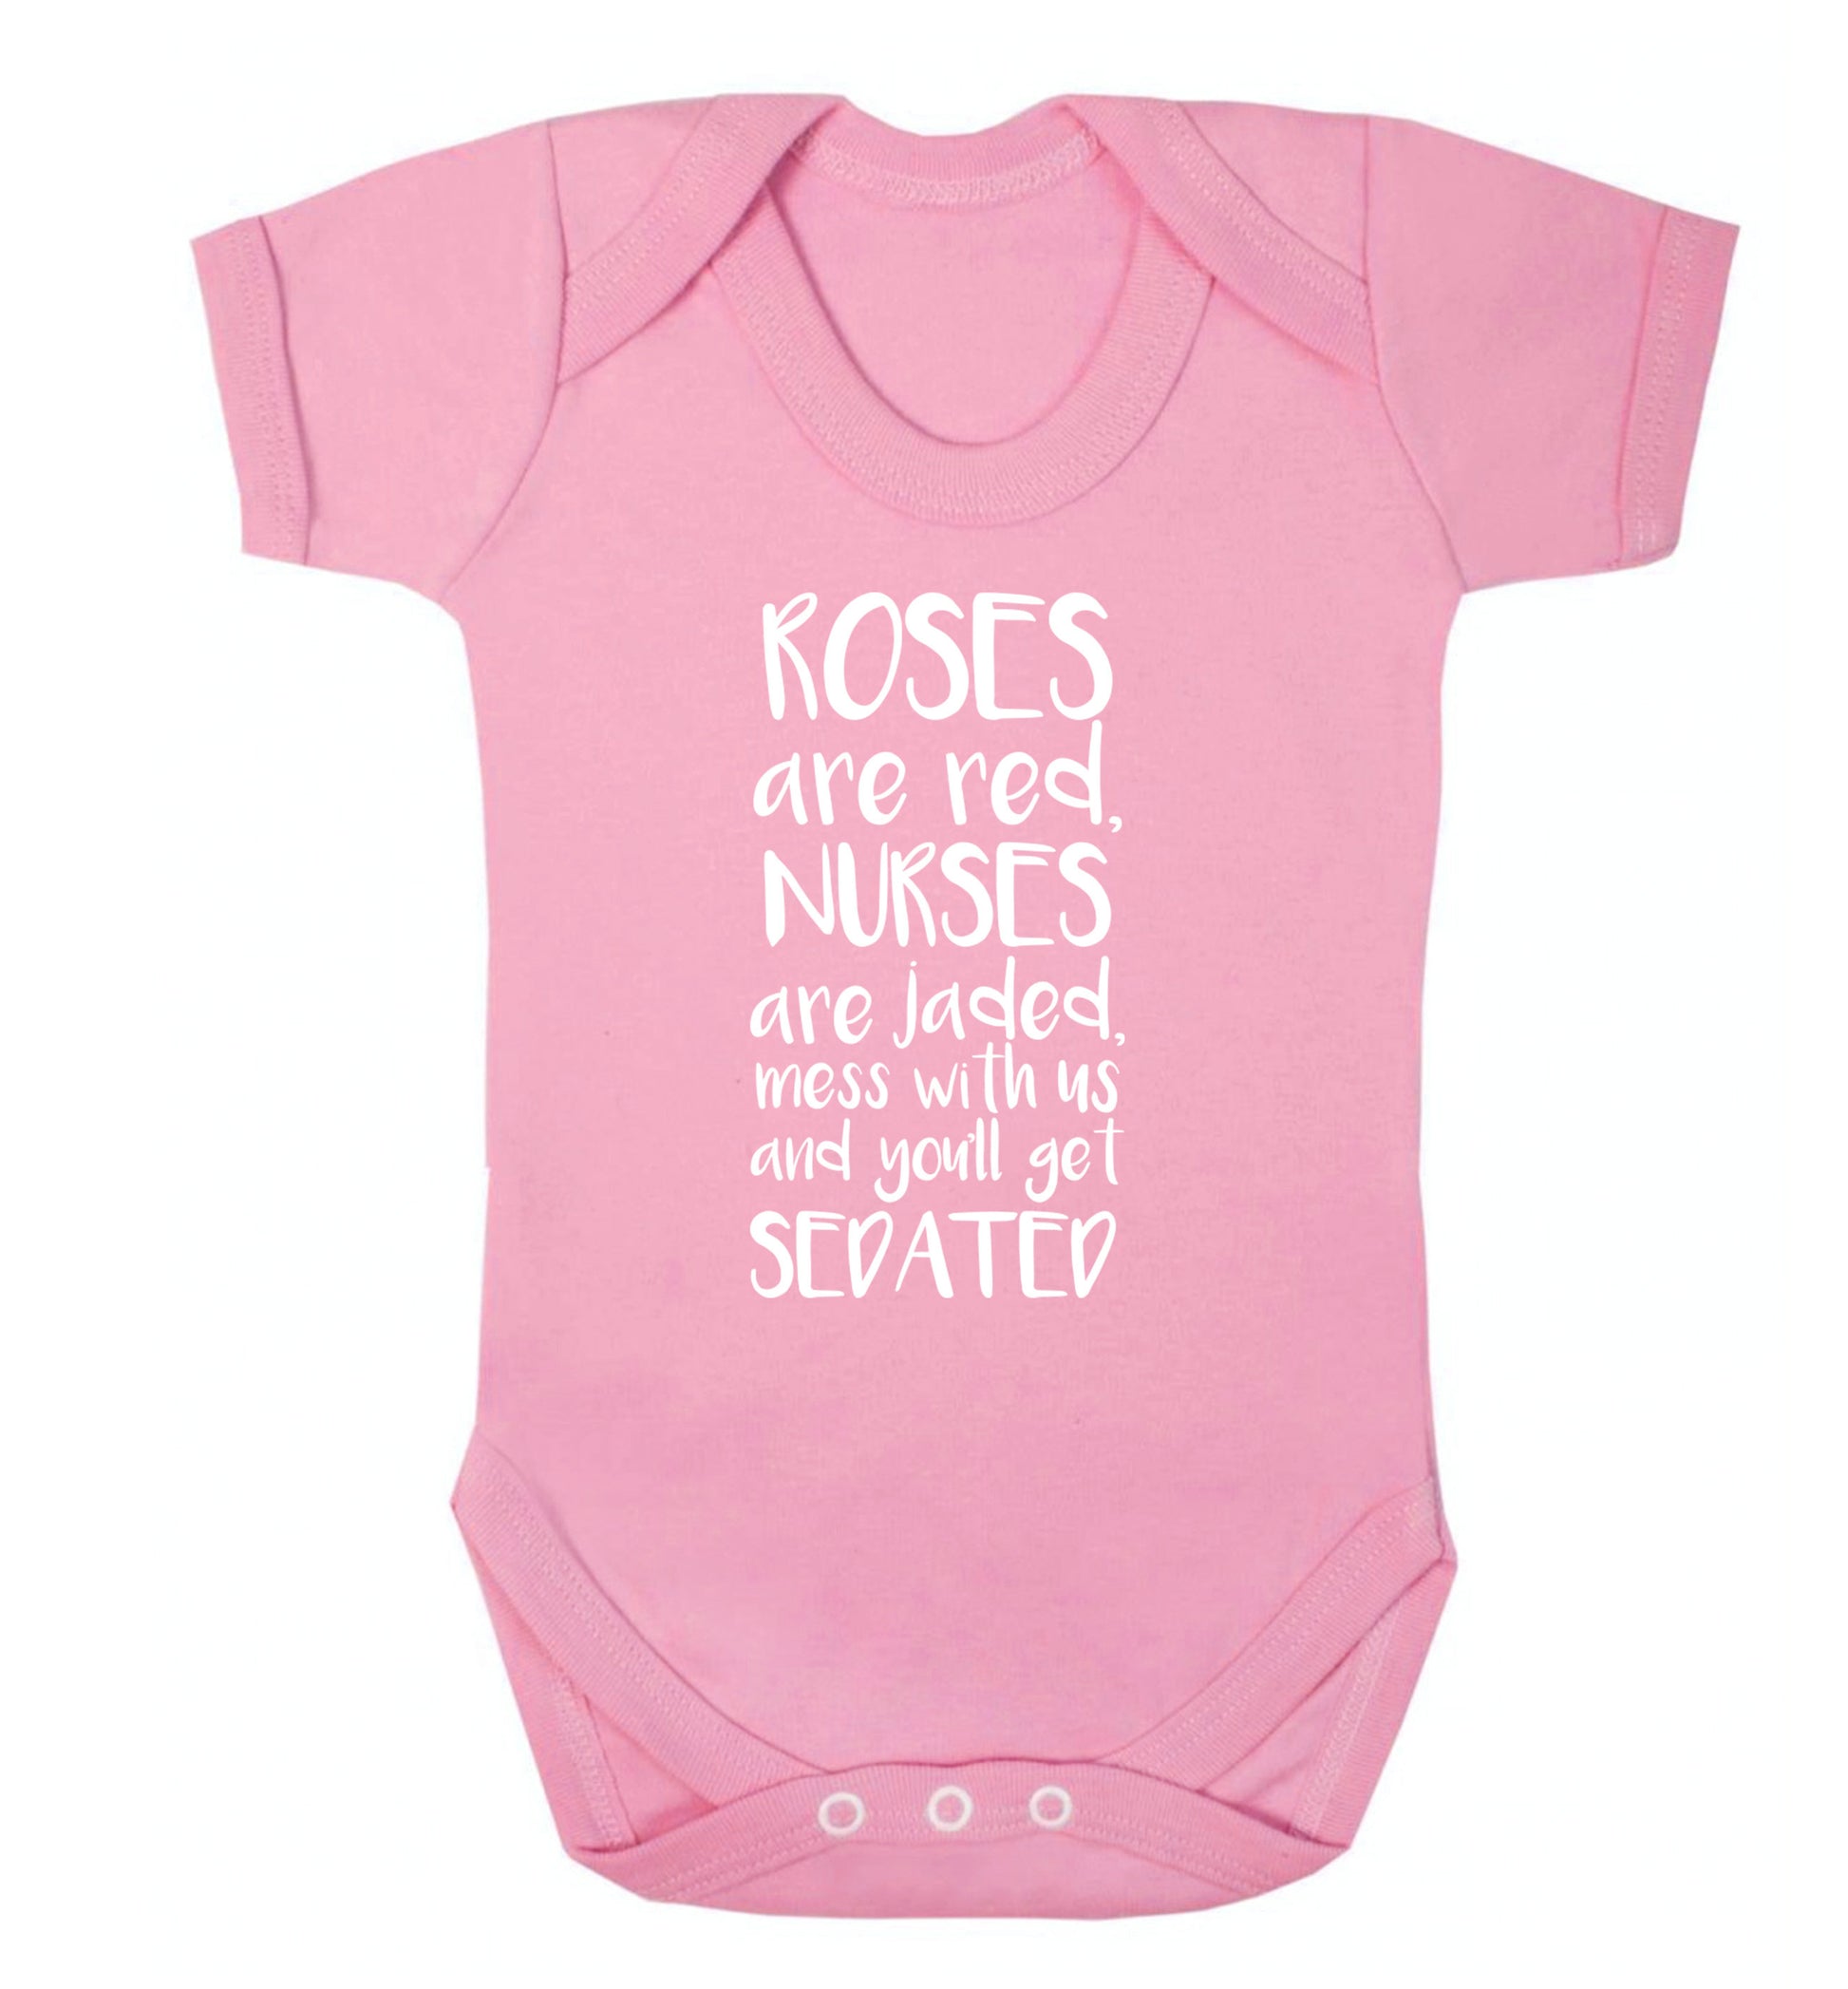 Roses are red, nurses are jaded, mess with us and you'll get sedated Baby Vest pale pink 18-24 months